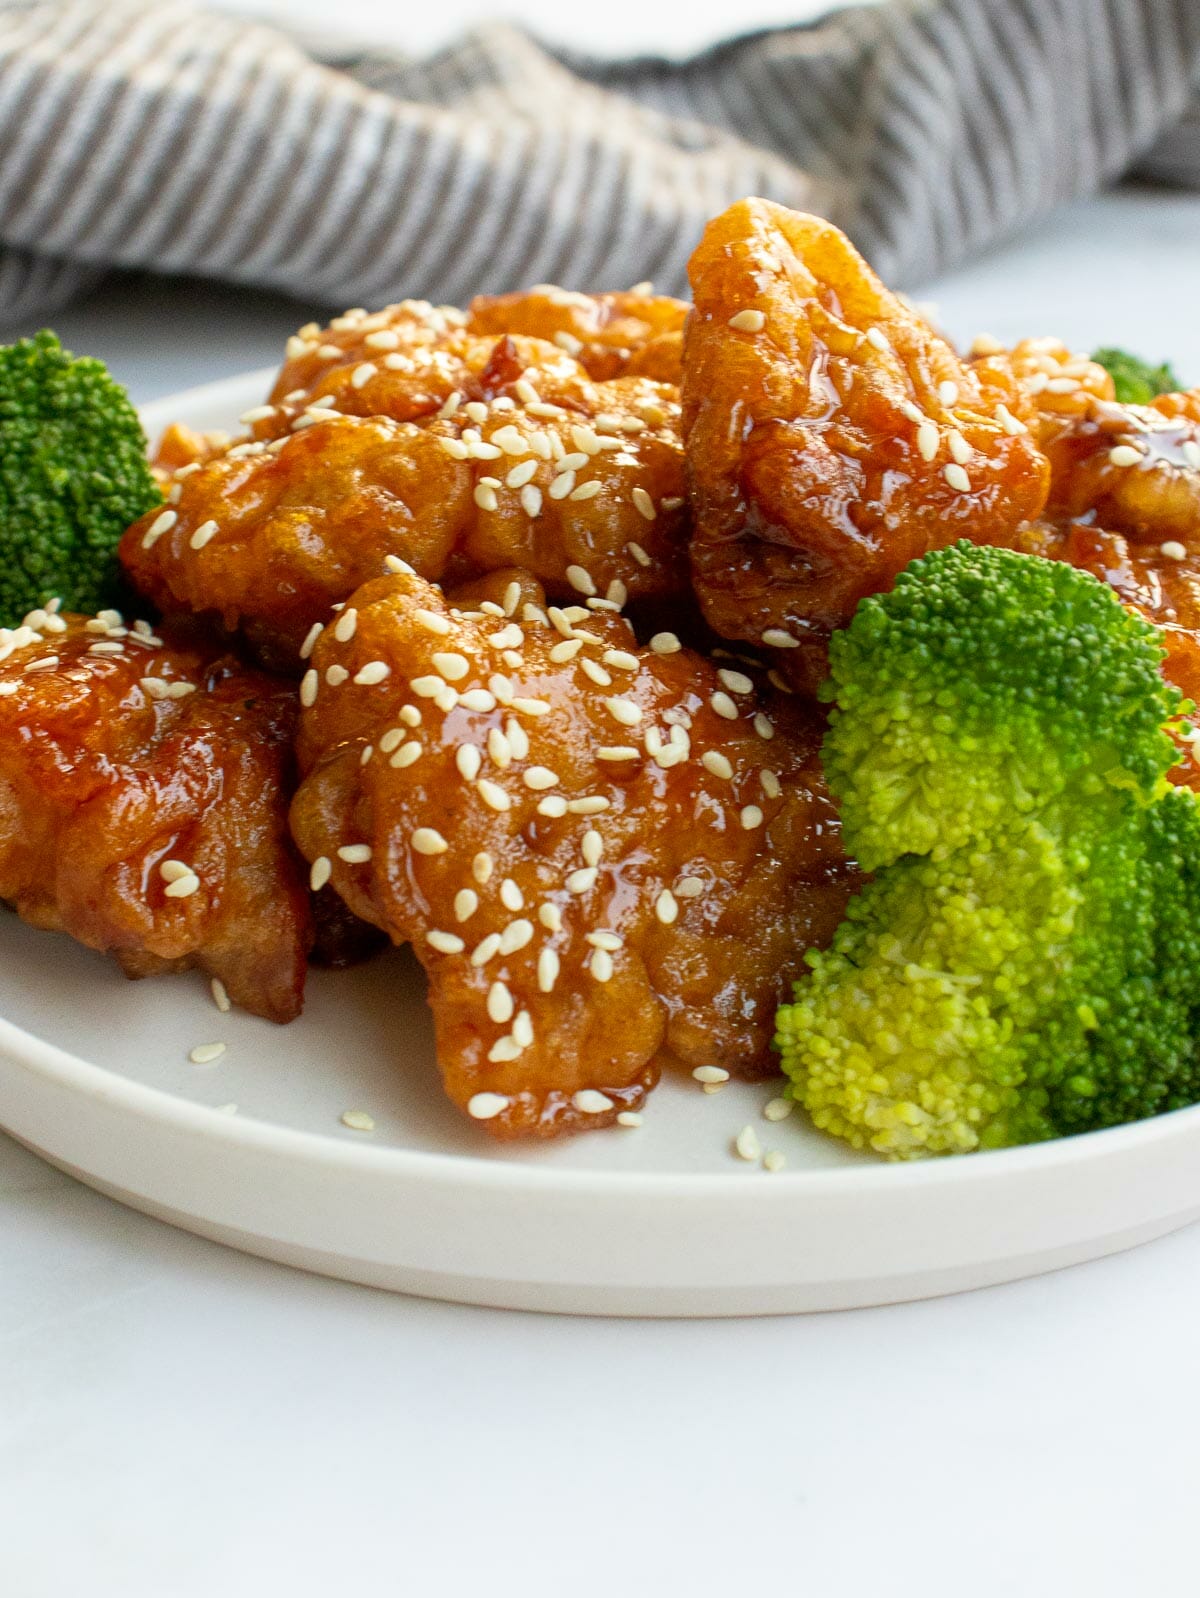 4 chicken nuggets topped with white sesame seeds and served with steamed broccoli